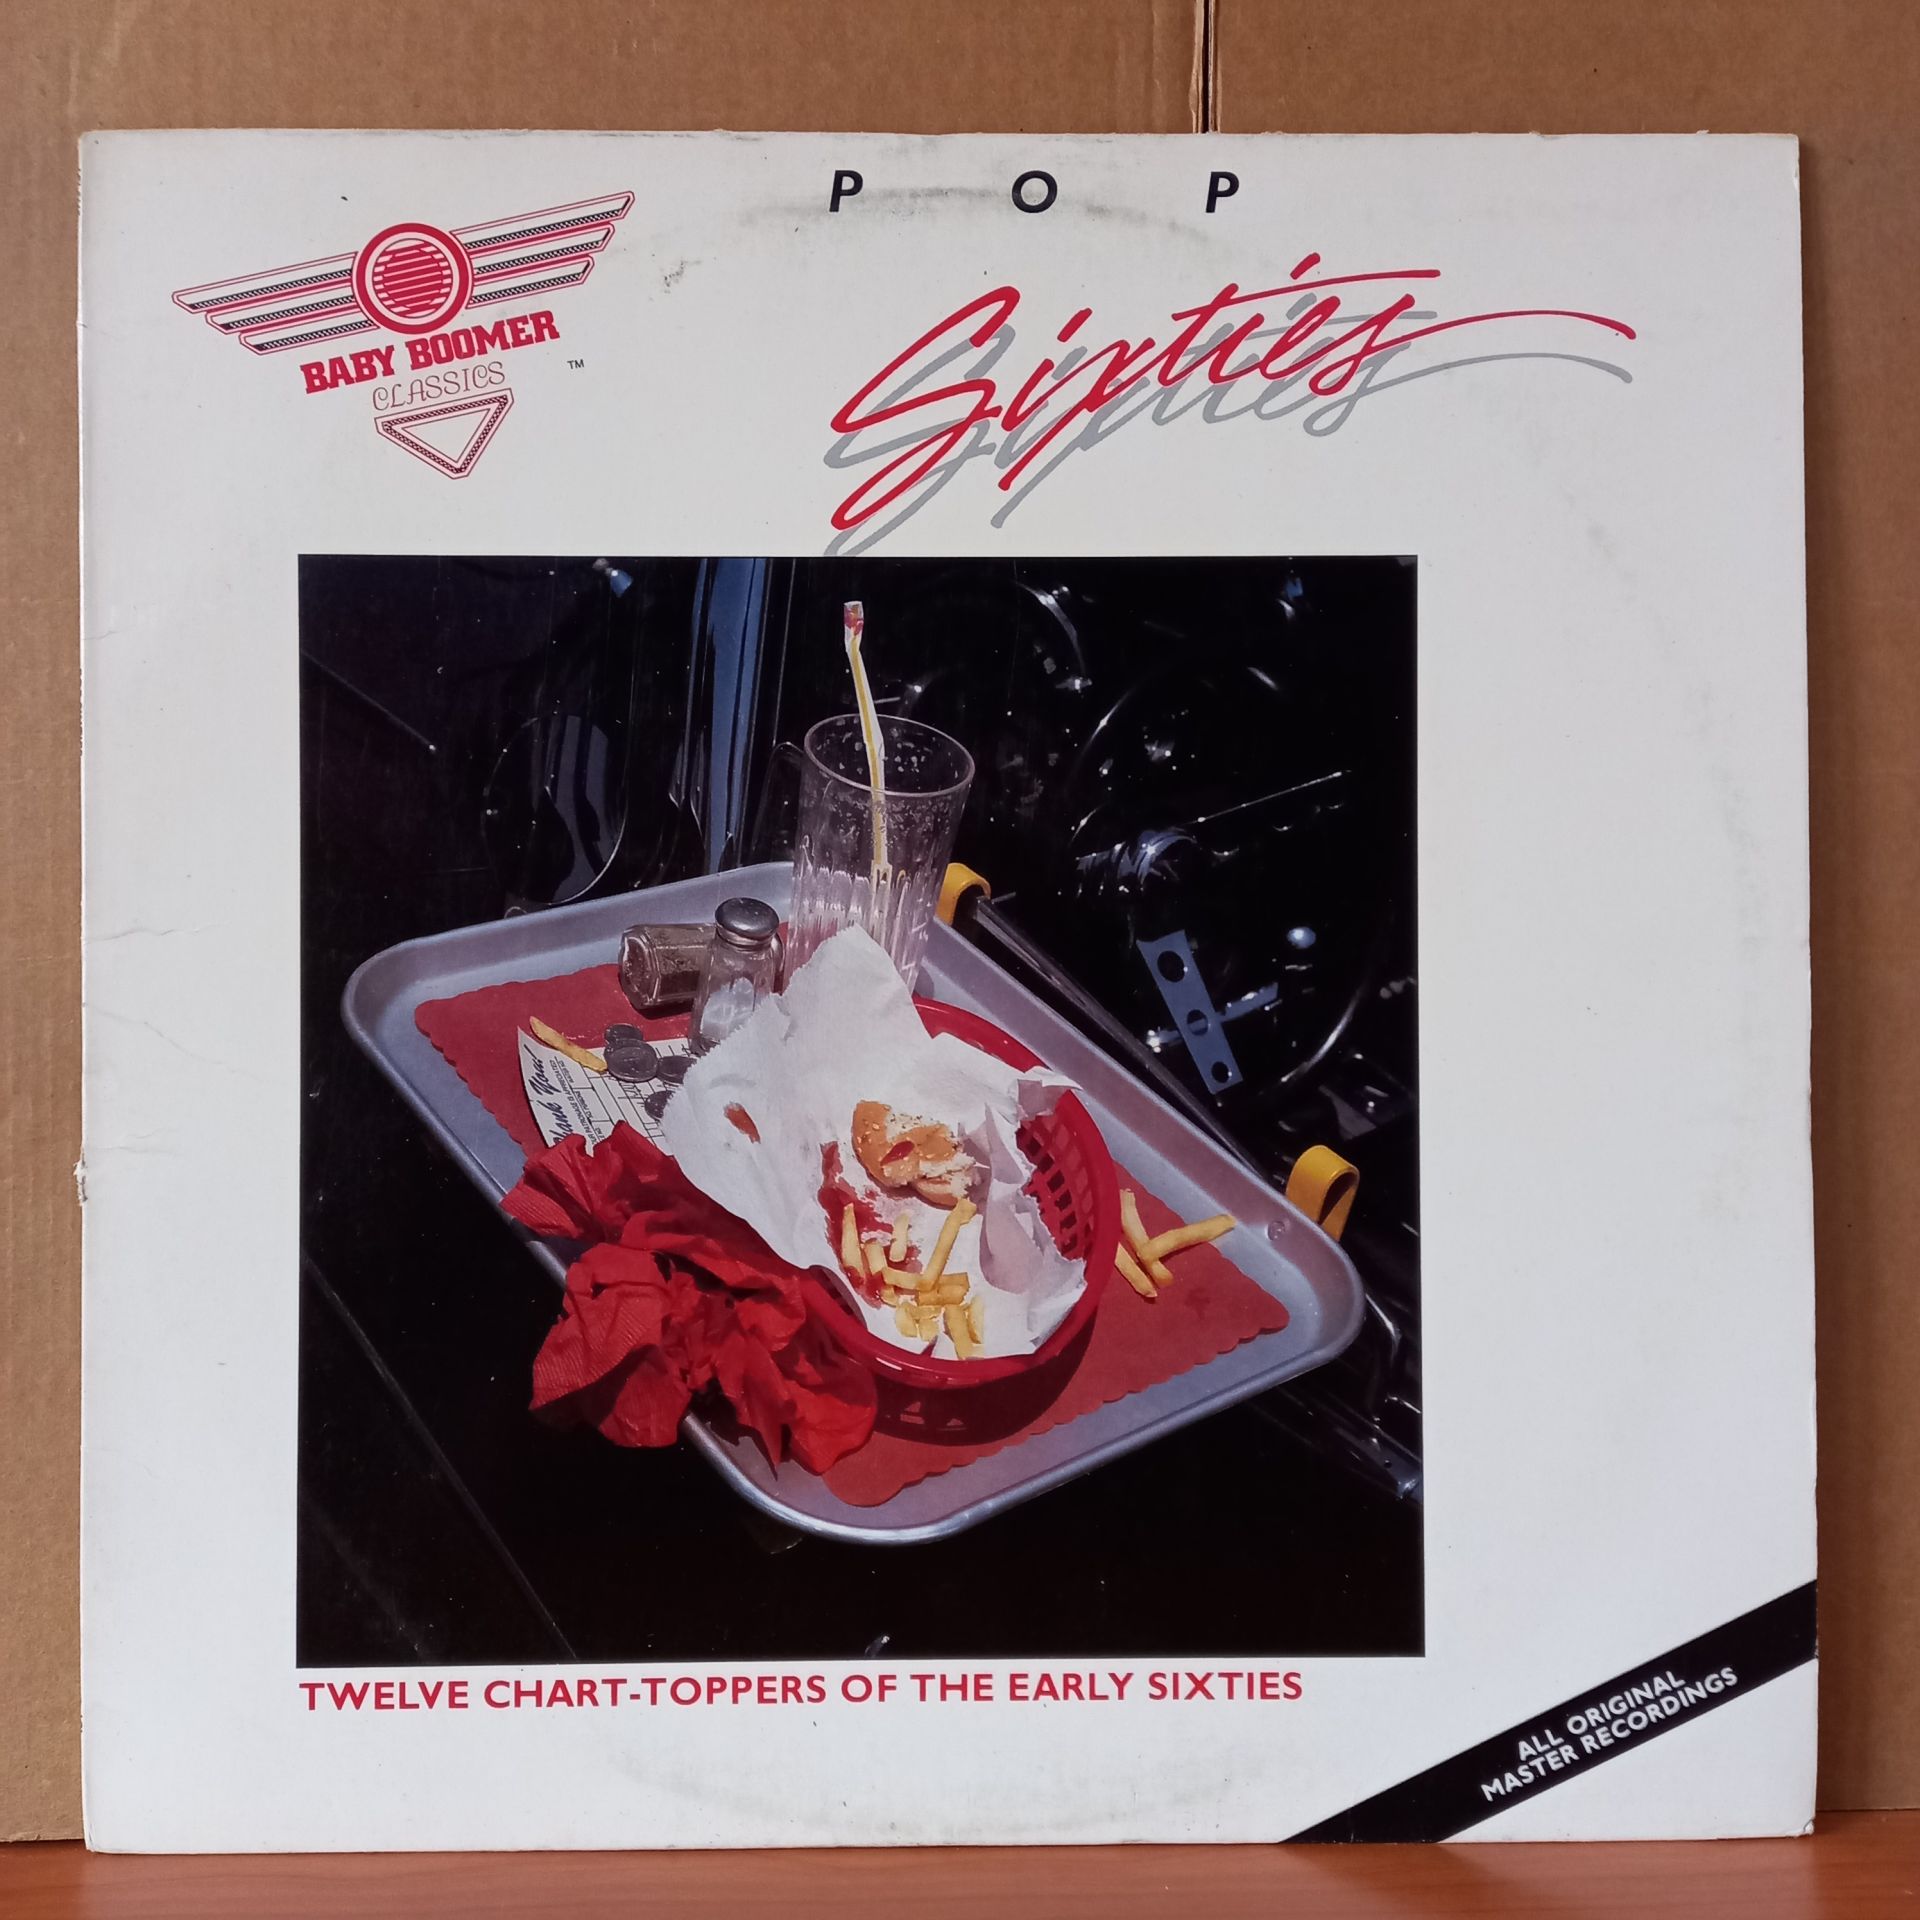 POP SIXTIES / LOU CHRISTIE, BRUCE CHANNEL, GENE CHANDLER, TORNADOES, THE EVERLY BROTHERS, BOBBY VEE, DION (1985) - LP 2.EL PLAK